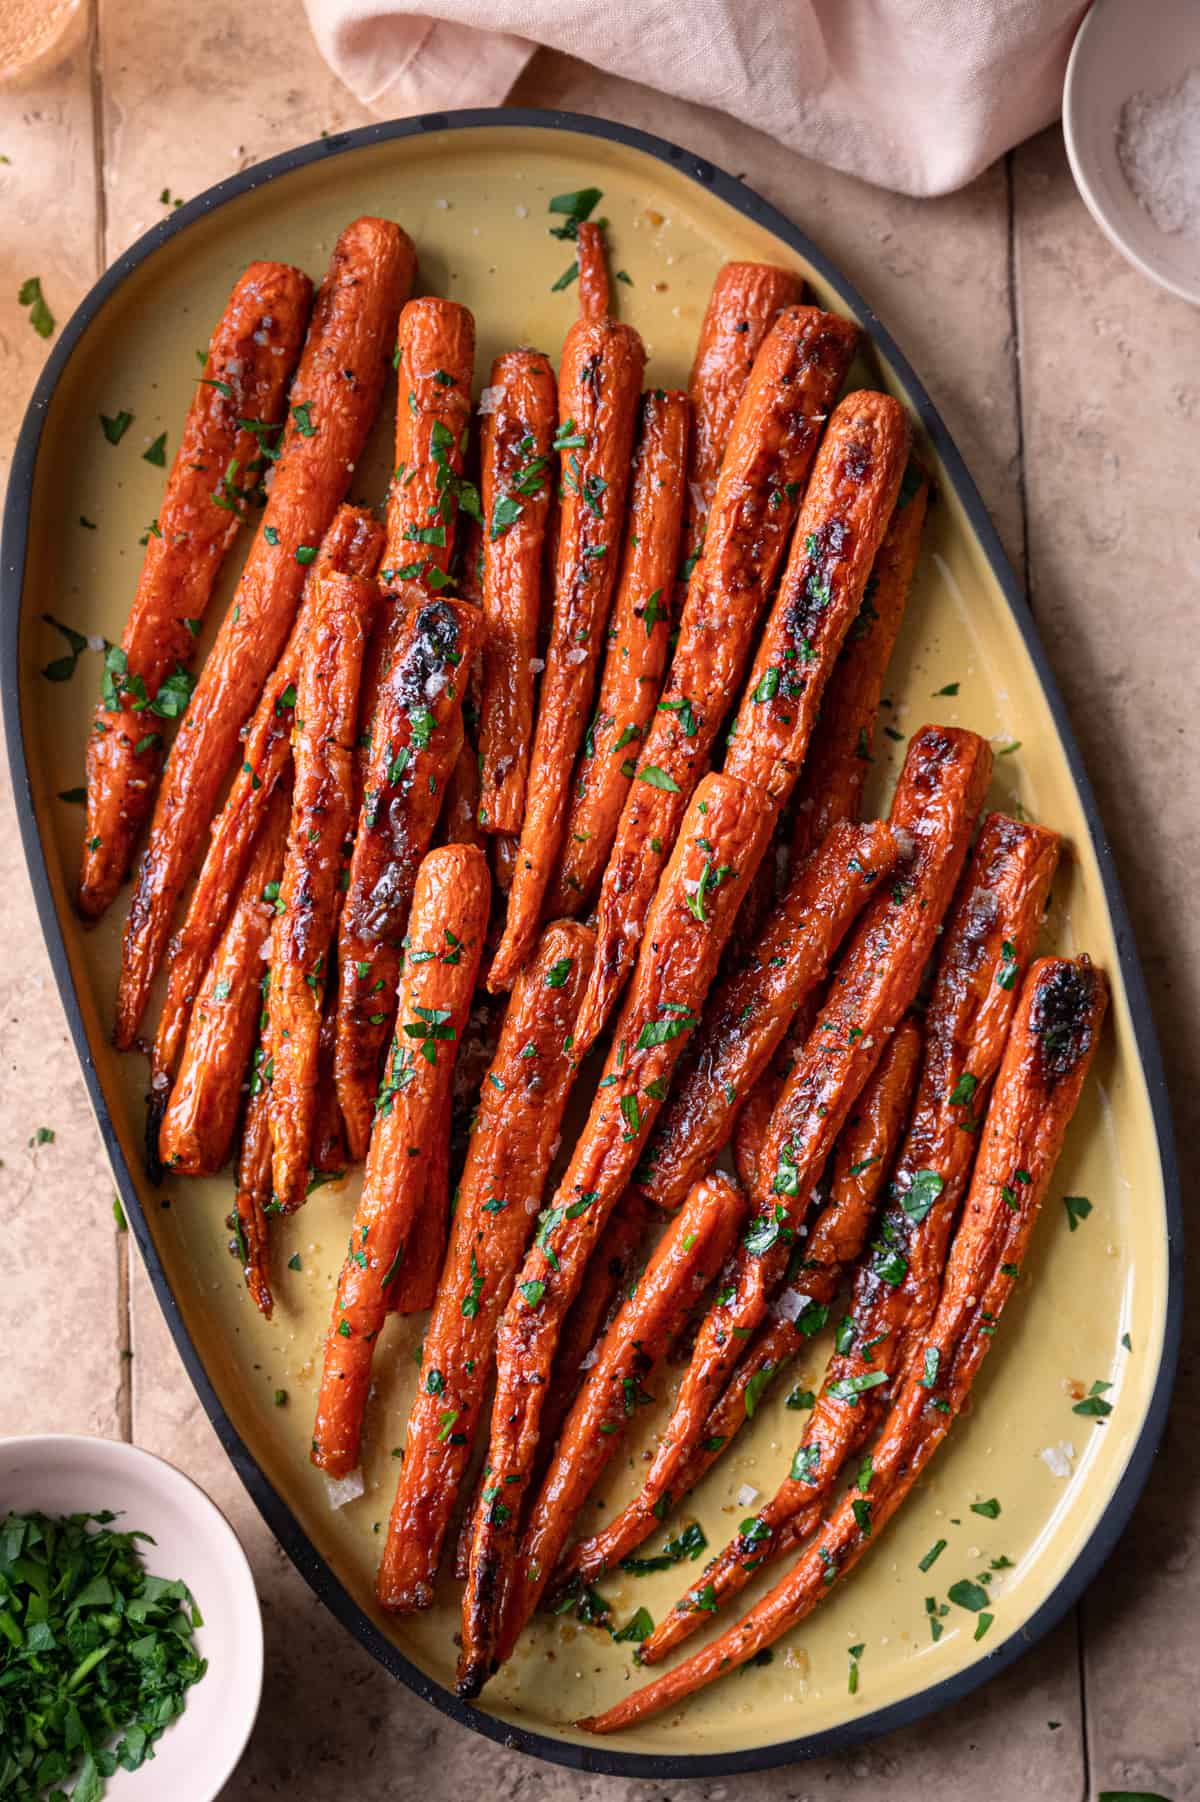 maple roasted carrots garnished with parsley on a yellow serving tray on a light pink tiled surface.